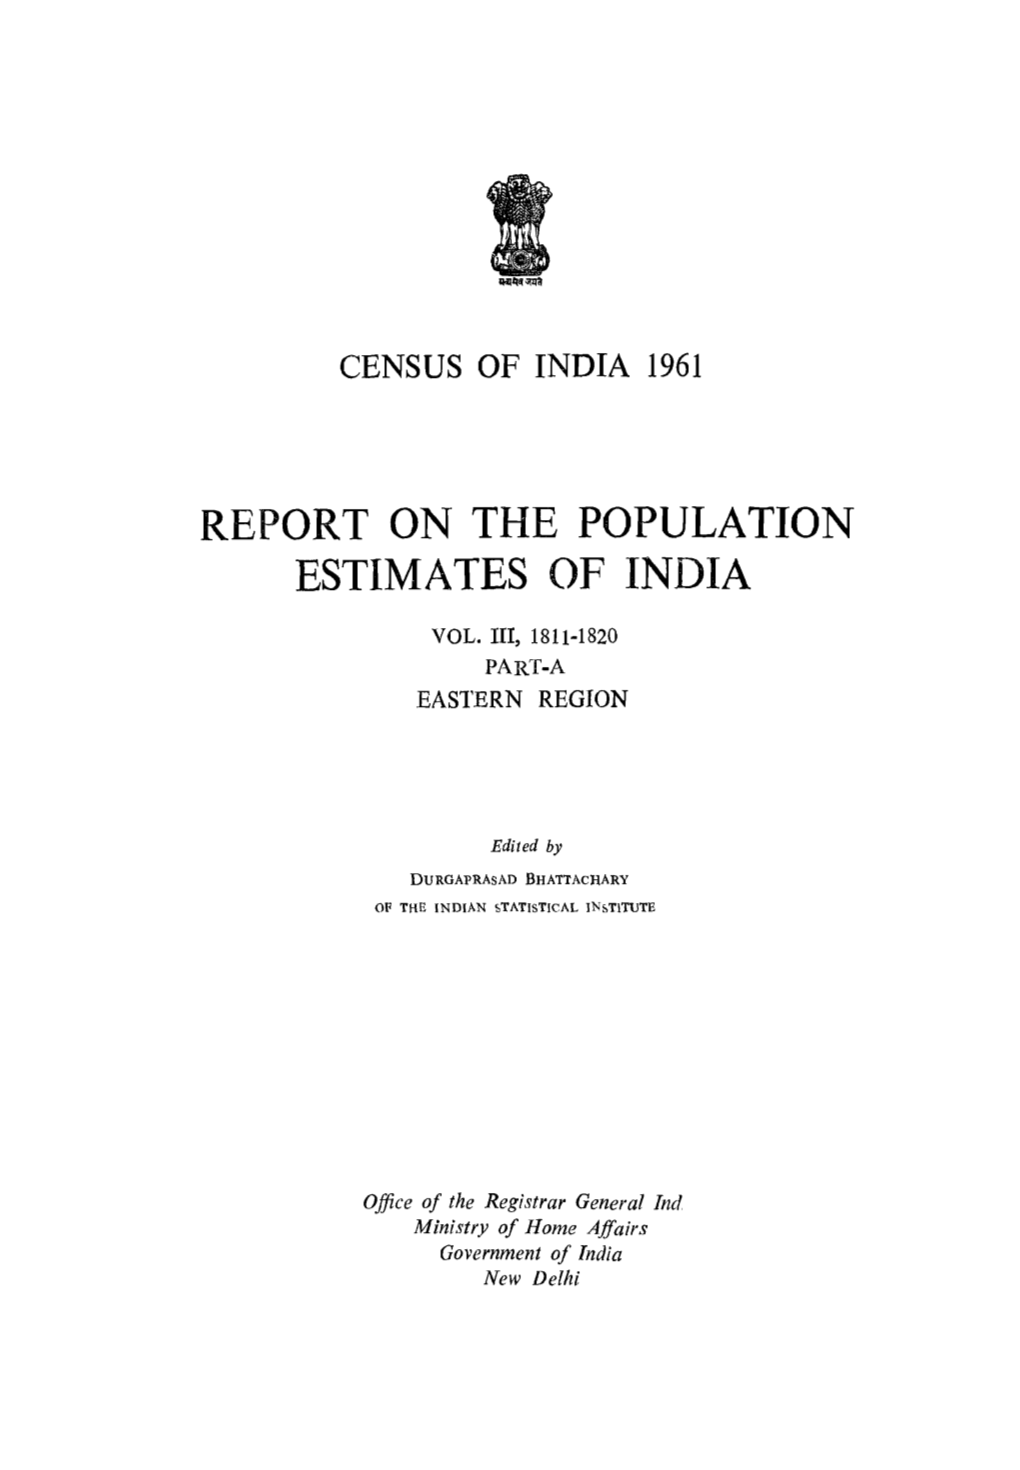 Reprot on the Population Estimates of India, Part